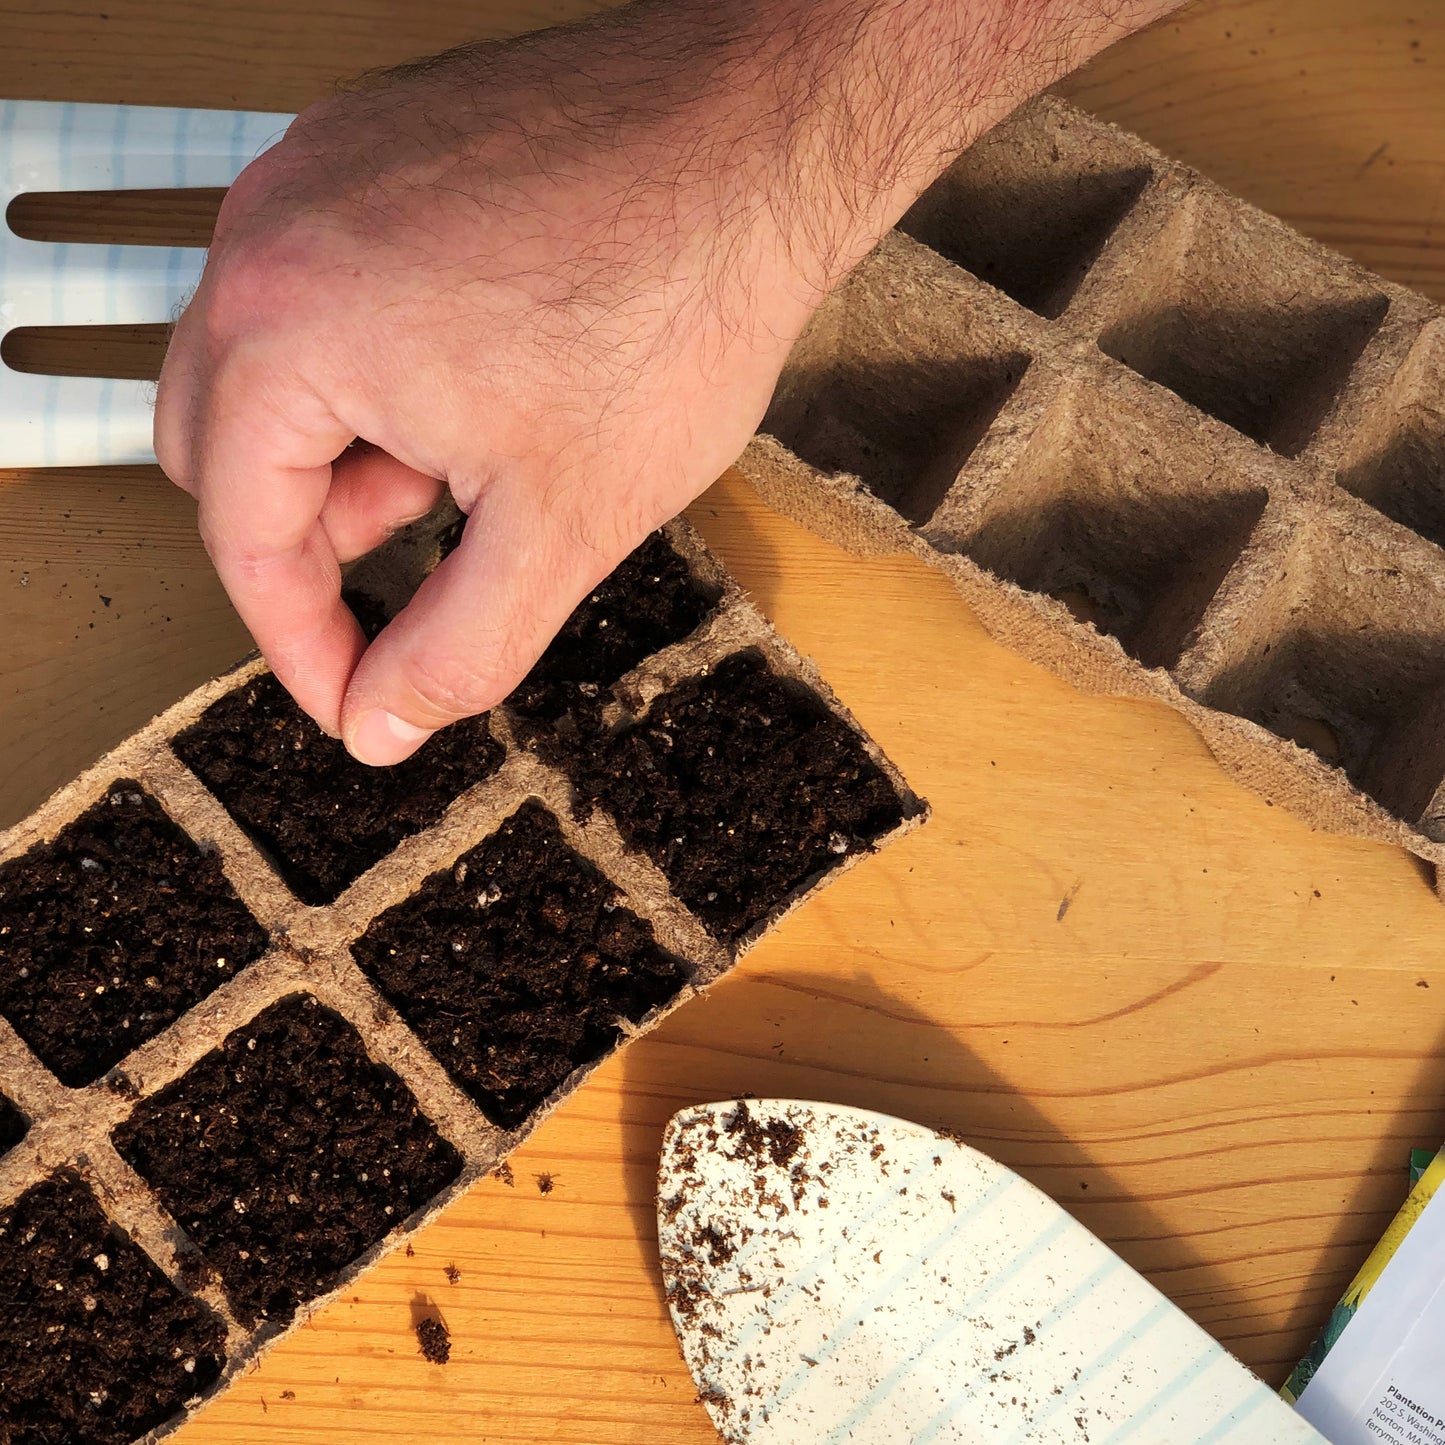 Start your Organic Gourmet Mesclun Greens seeds in Jiffy biodegradable peat strip trays which are easy to use for transplanting seedlings.